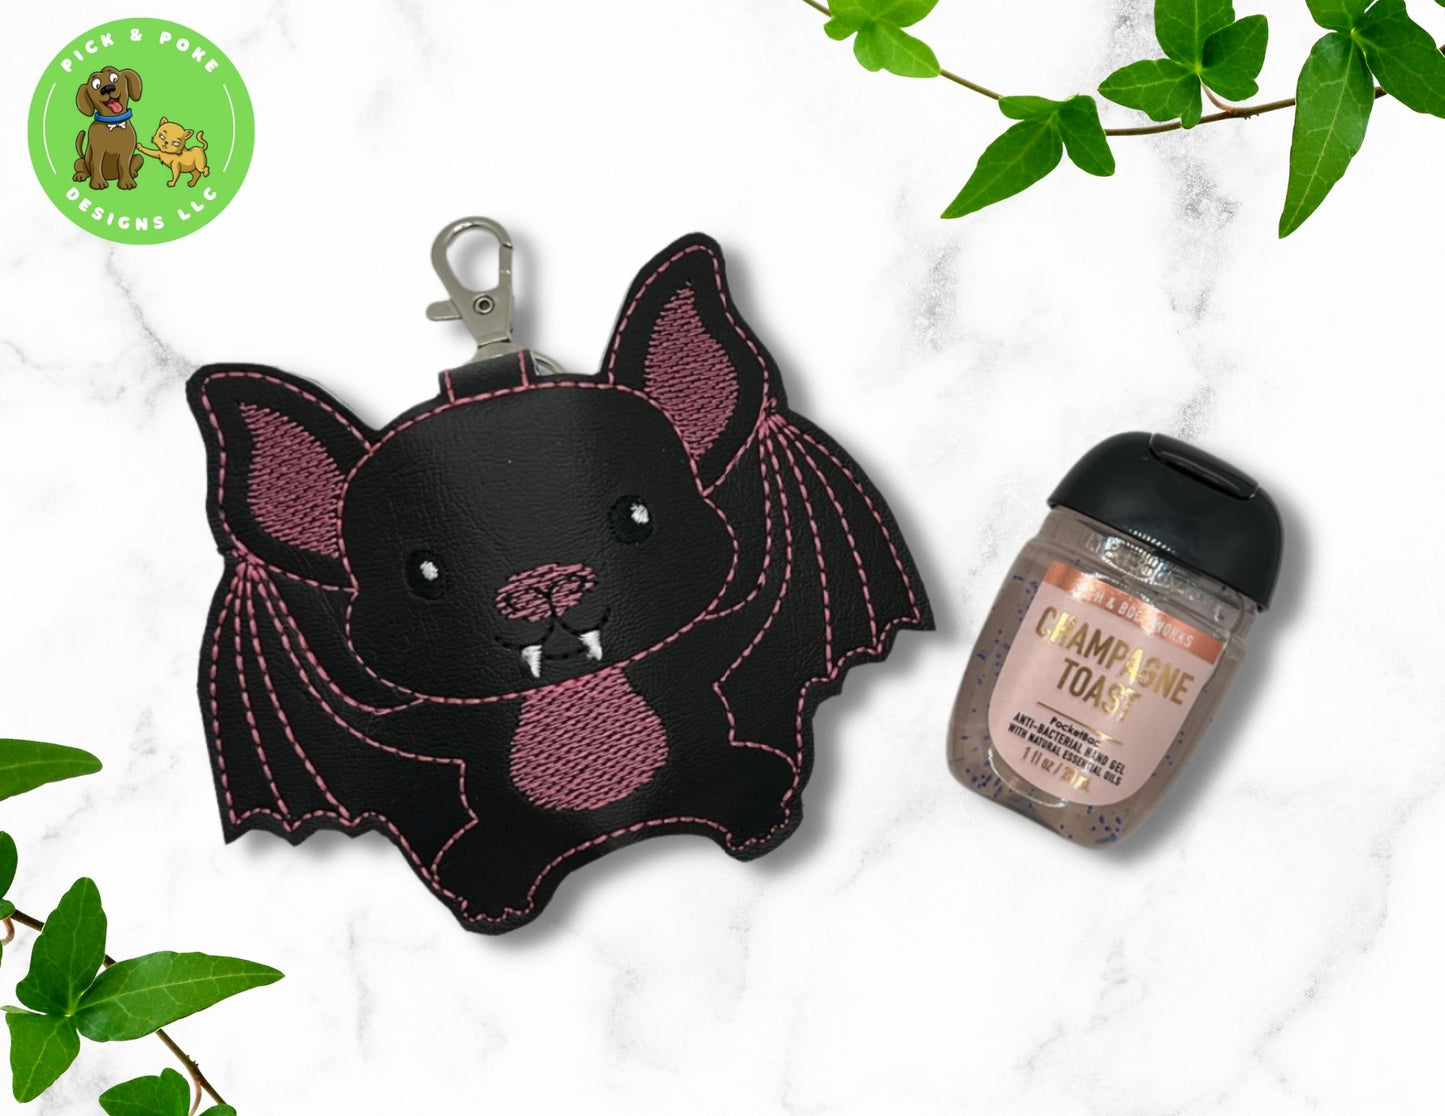 Vinyl hand saniziter holder in the shape of  cartoon bat with pink stitching and lobster clasp style key ring. 